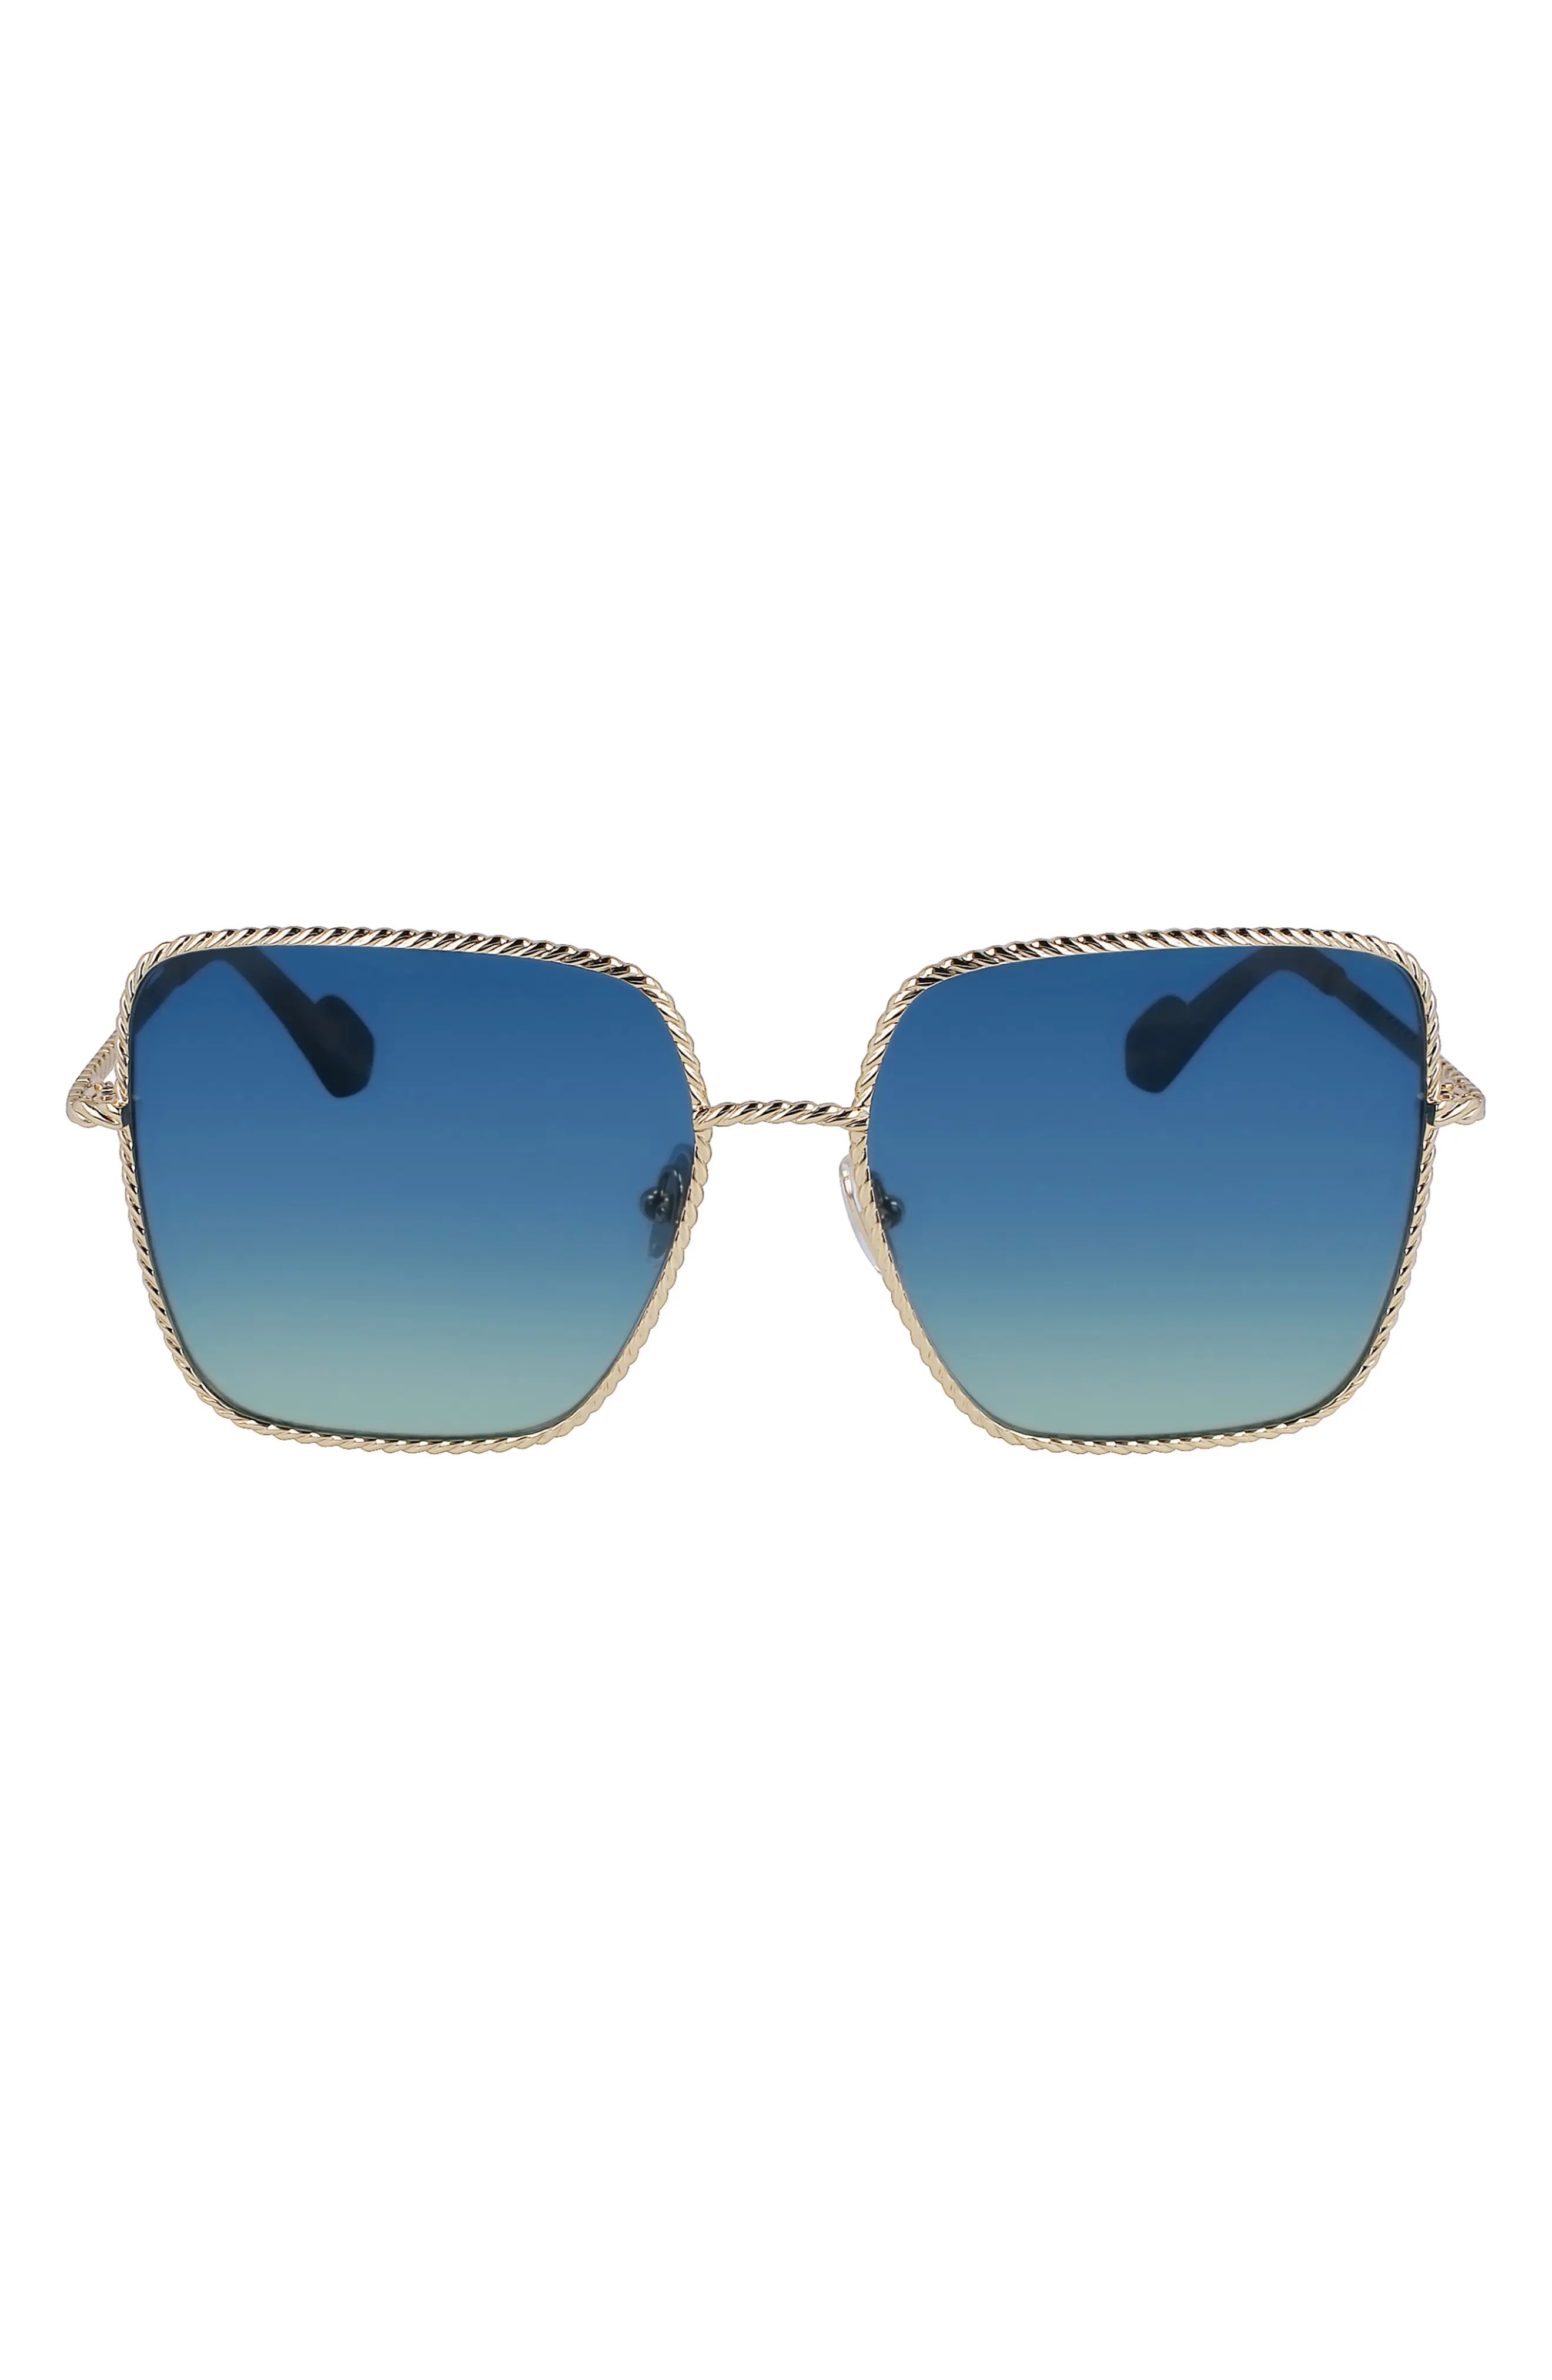 Babe 59mm Gradient Square Sunglasses in Gold/Gradient Blue Green - 1